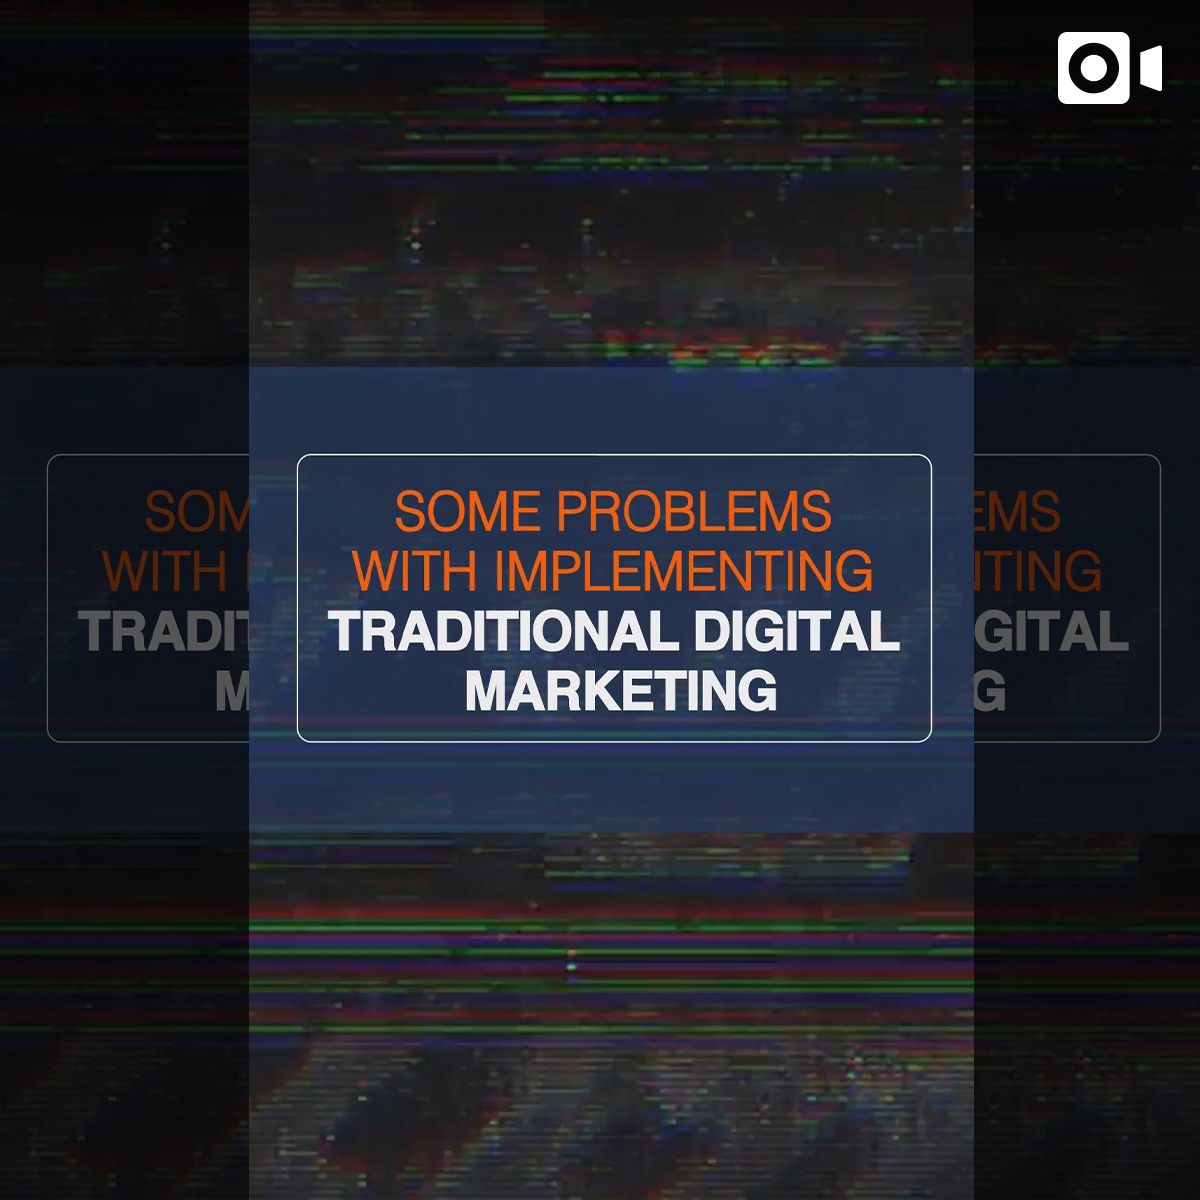 There are several problems of implementing Traditional Digital Marketing...